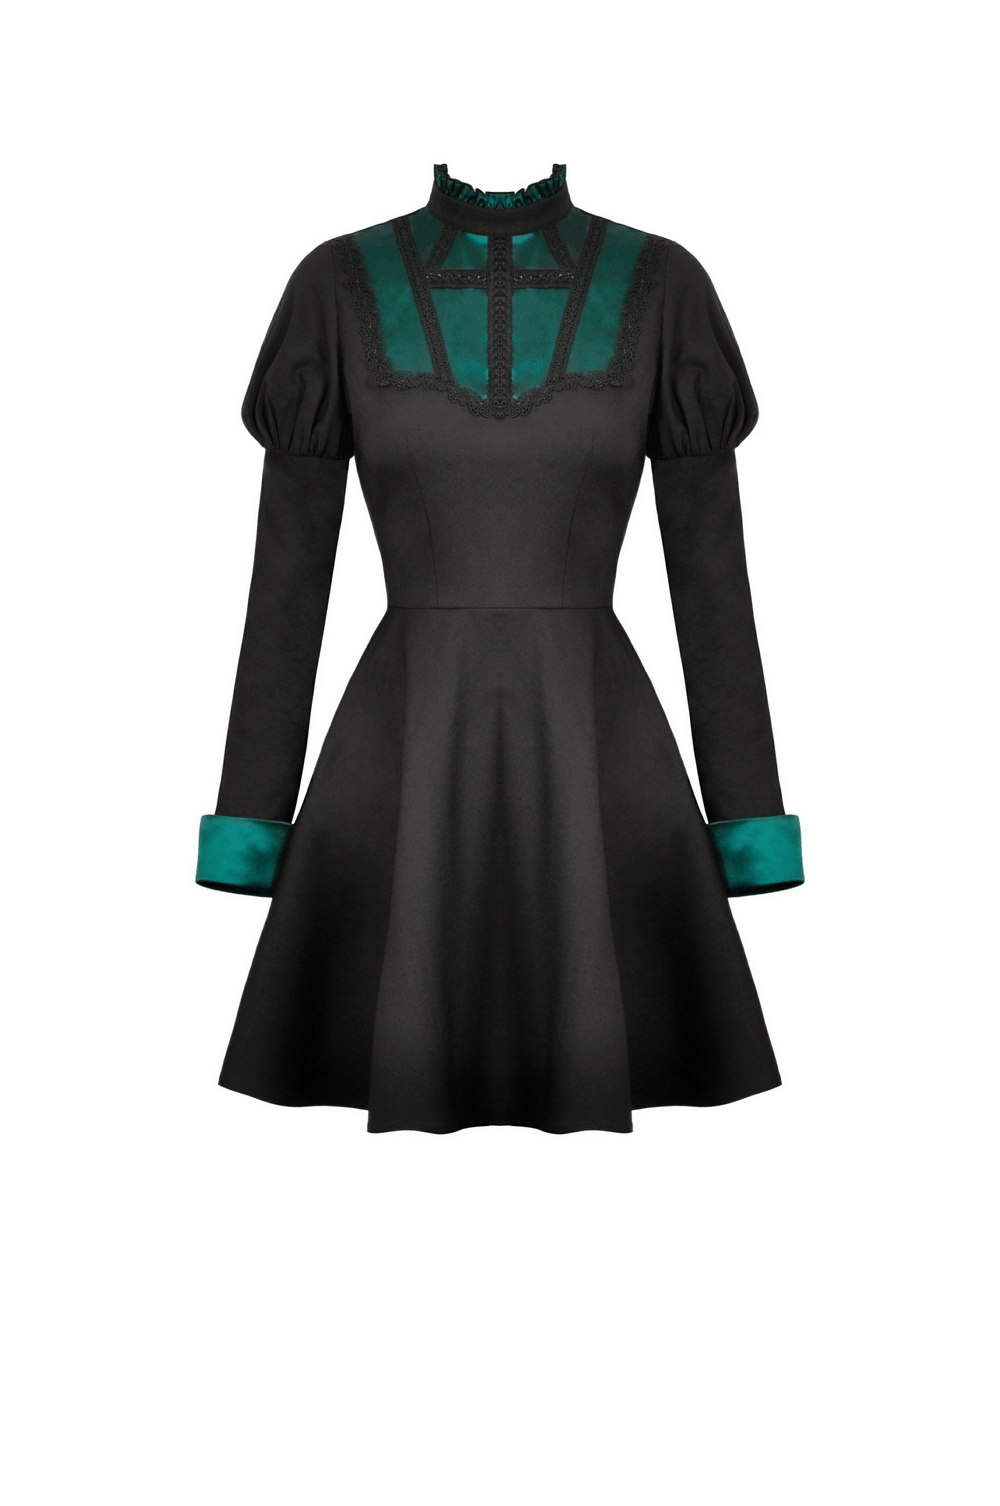 Black Gothic Dress with Emerald Trim and Lace Accents